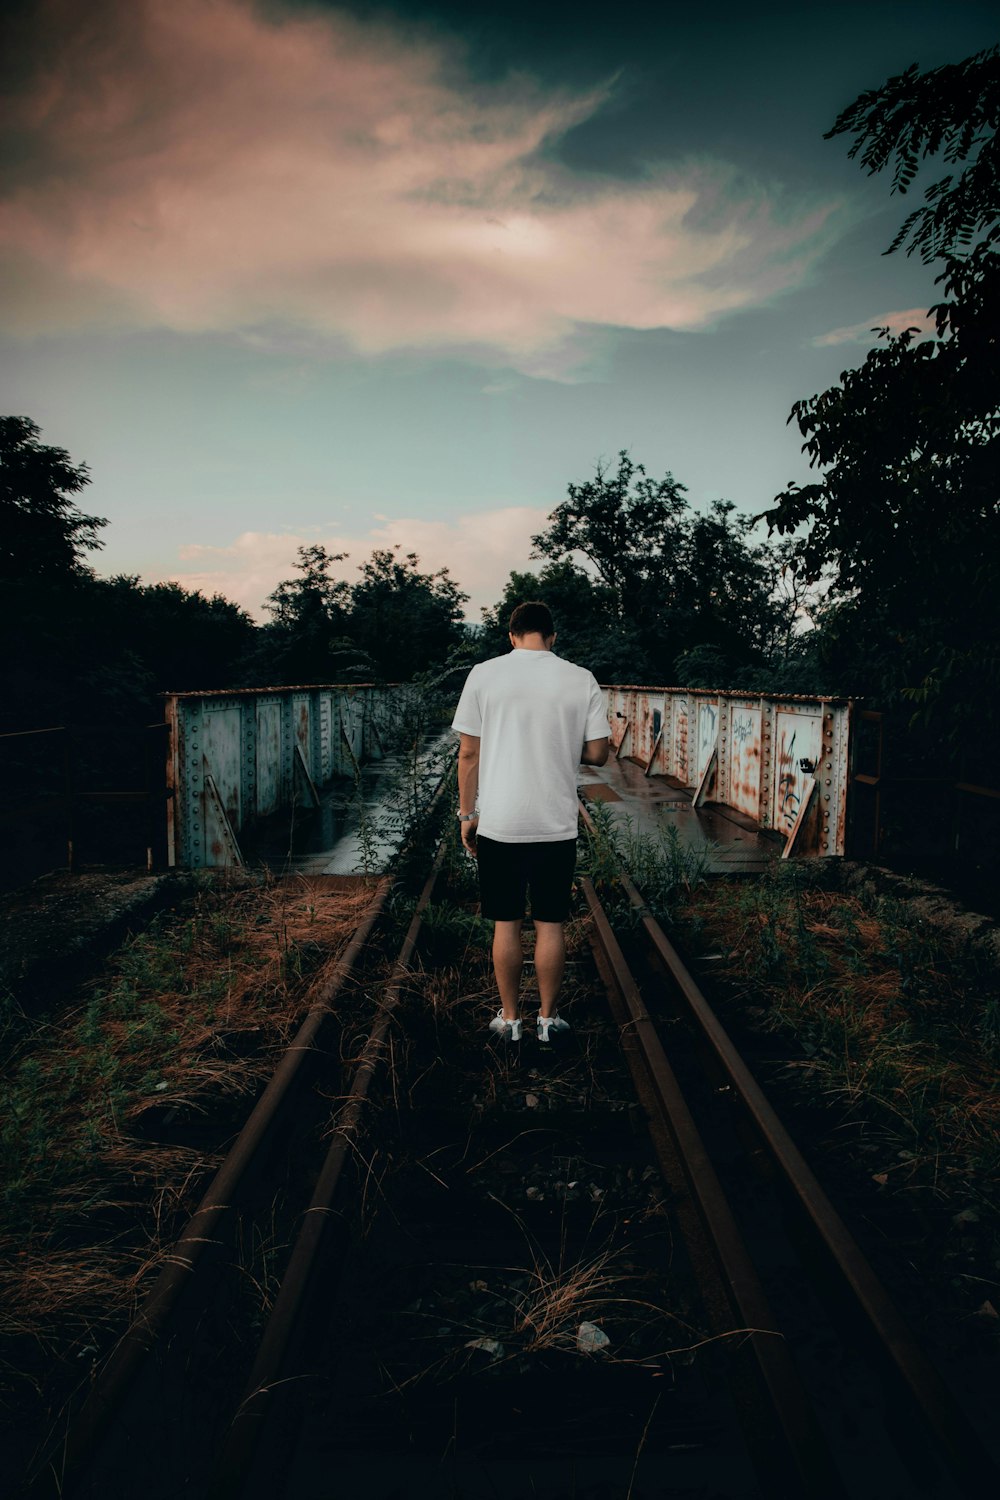 man in white T-shirt and black shorts standing on railway